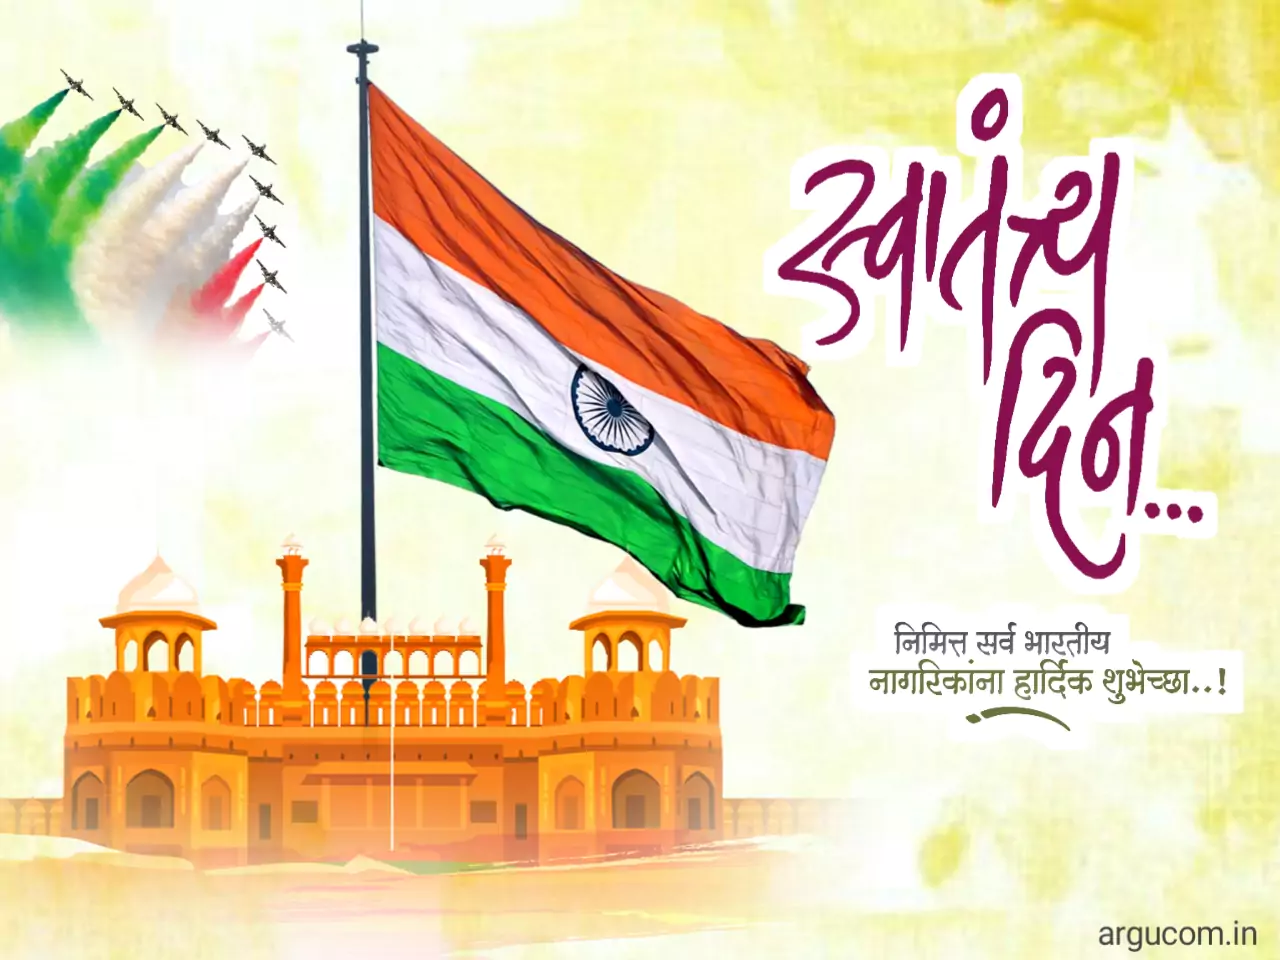 Independence day greeting in Marathi